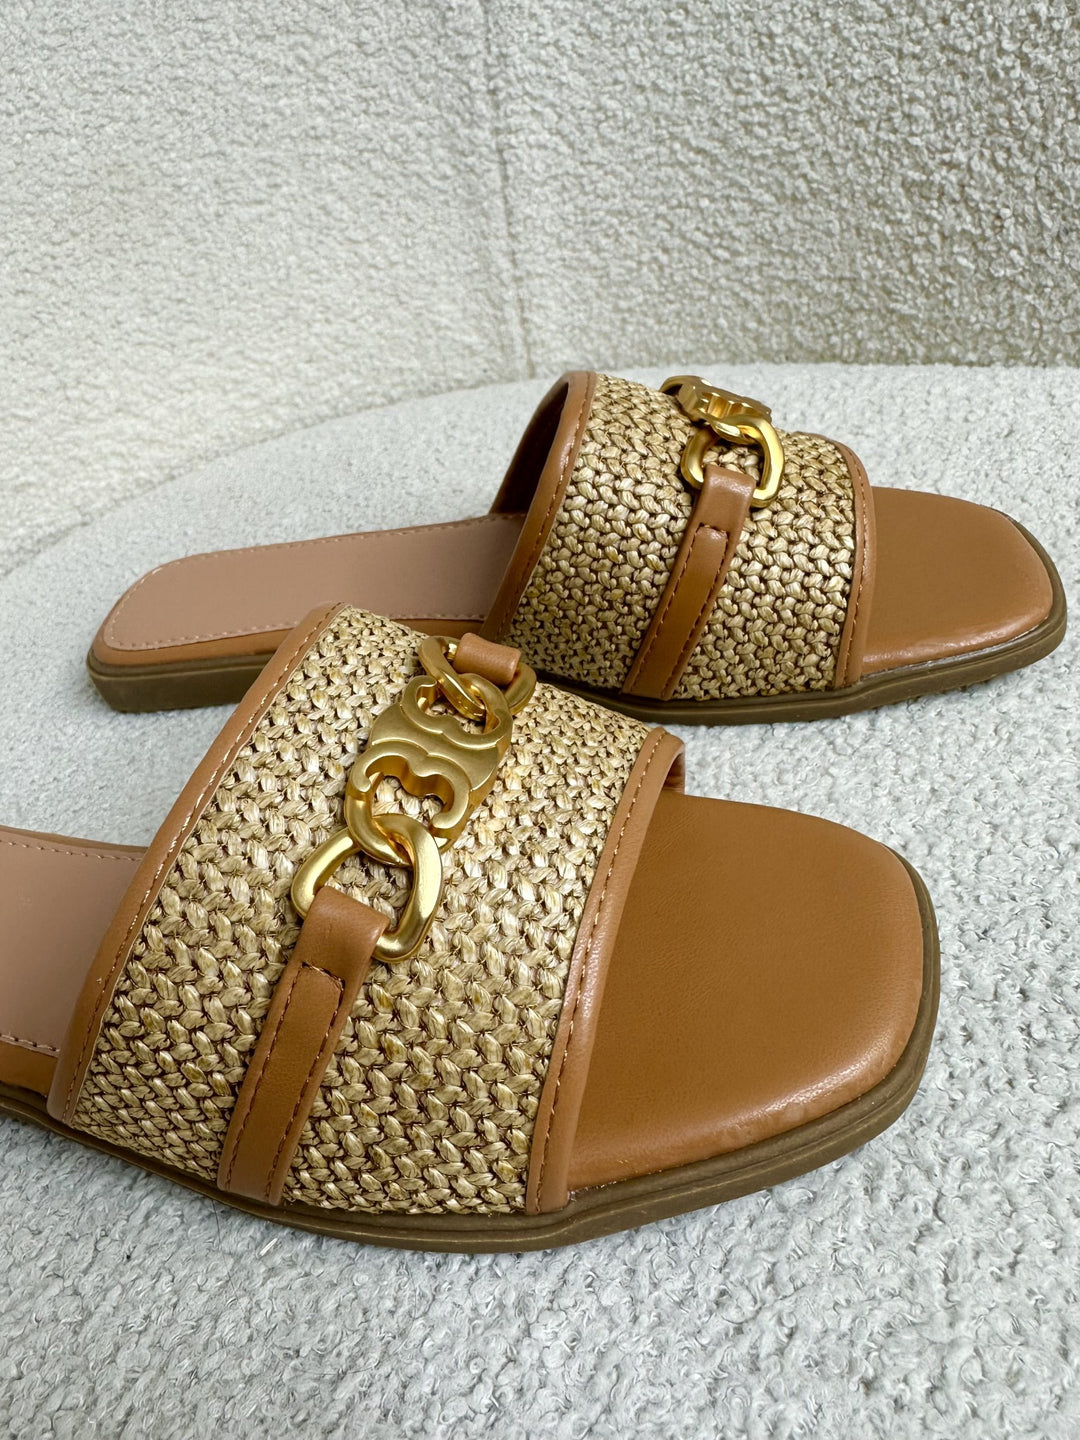 Tan Woven Detail Gold Buckle Sliders 337